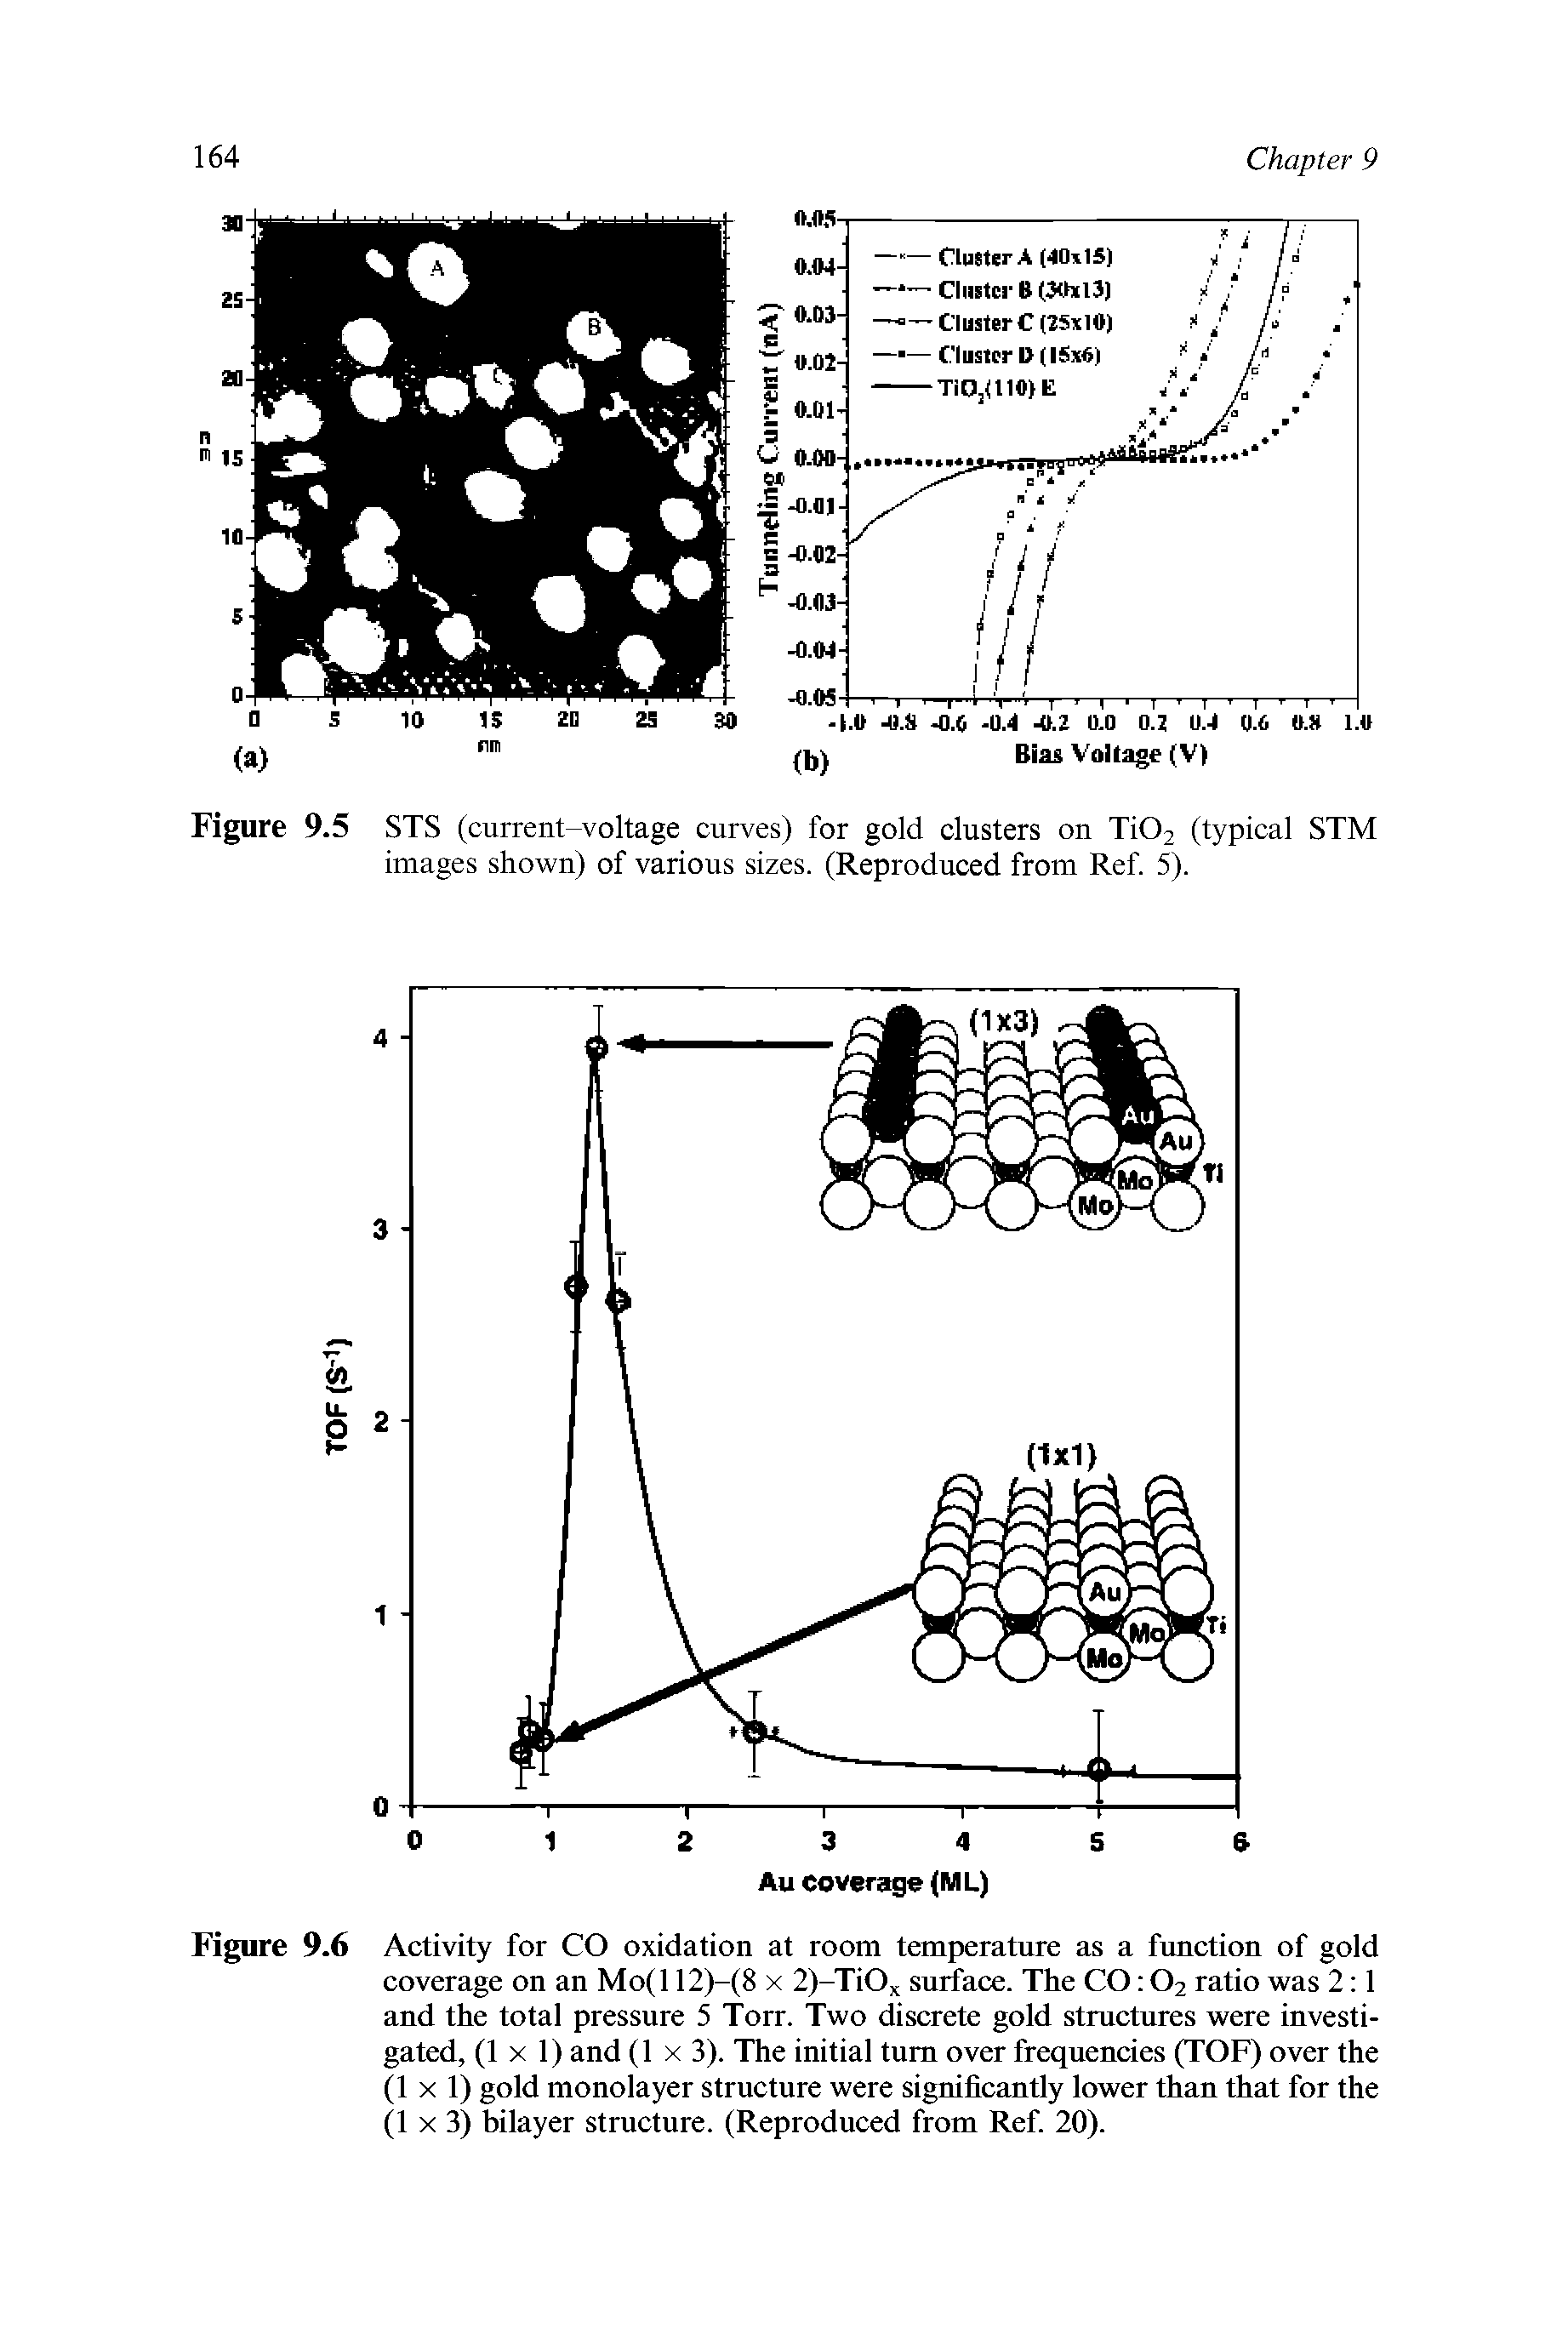 Figure 9.6 Activity for CO oxidation at room temperature as a function of gold coverage on an Mo(l 12)—(8 x 2)-TiOx surface. The CO 02 ratio was 2 1 and the total pressure 5 Torr. Two discrete gold structures were investigated, (lxl) and (1 x 3). The initial turn over frequencies (TOF) over the (1 x 1) gold monolayer structure were significantly lower than that for the (1 x 3) bilayer structure. (Reproduced from Ref. 20).